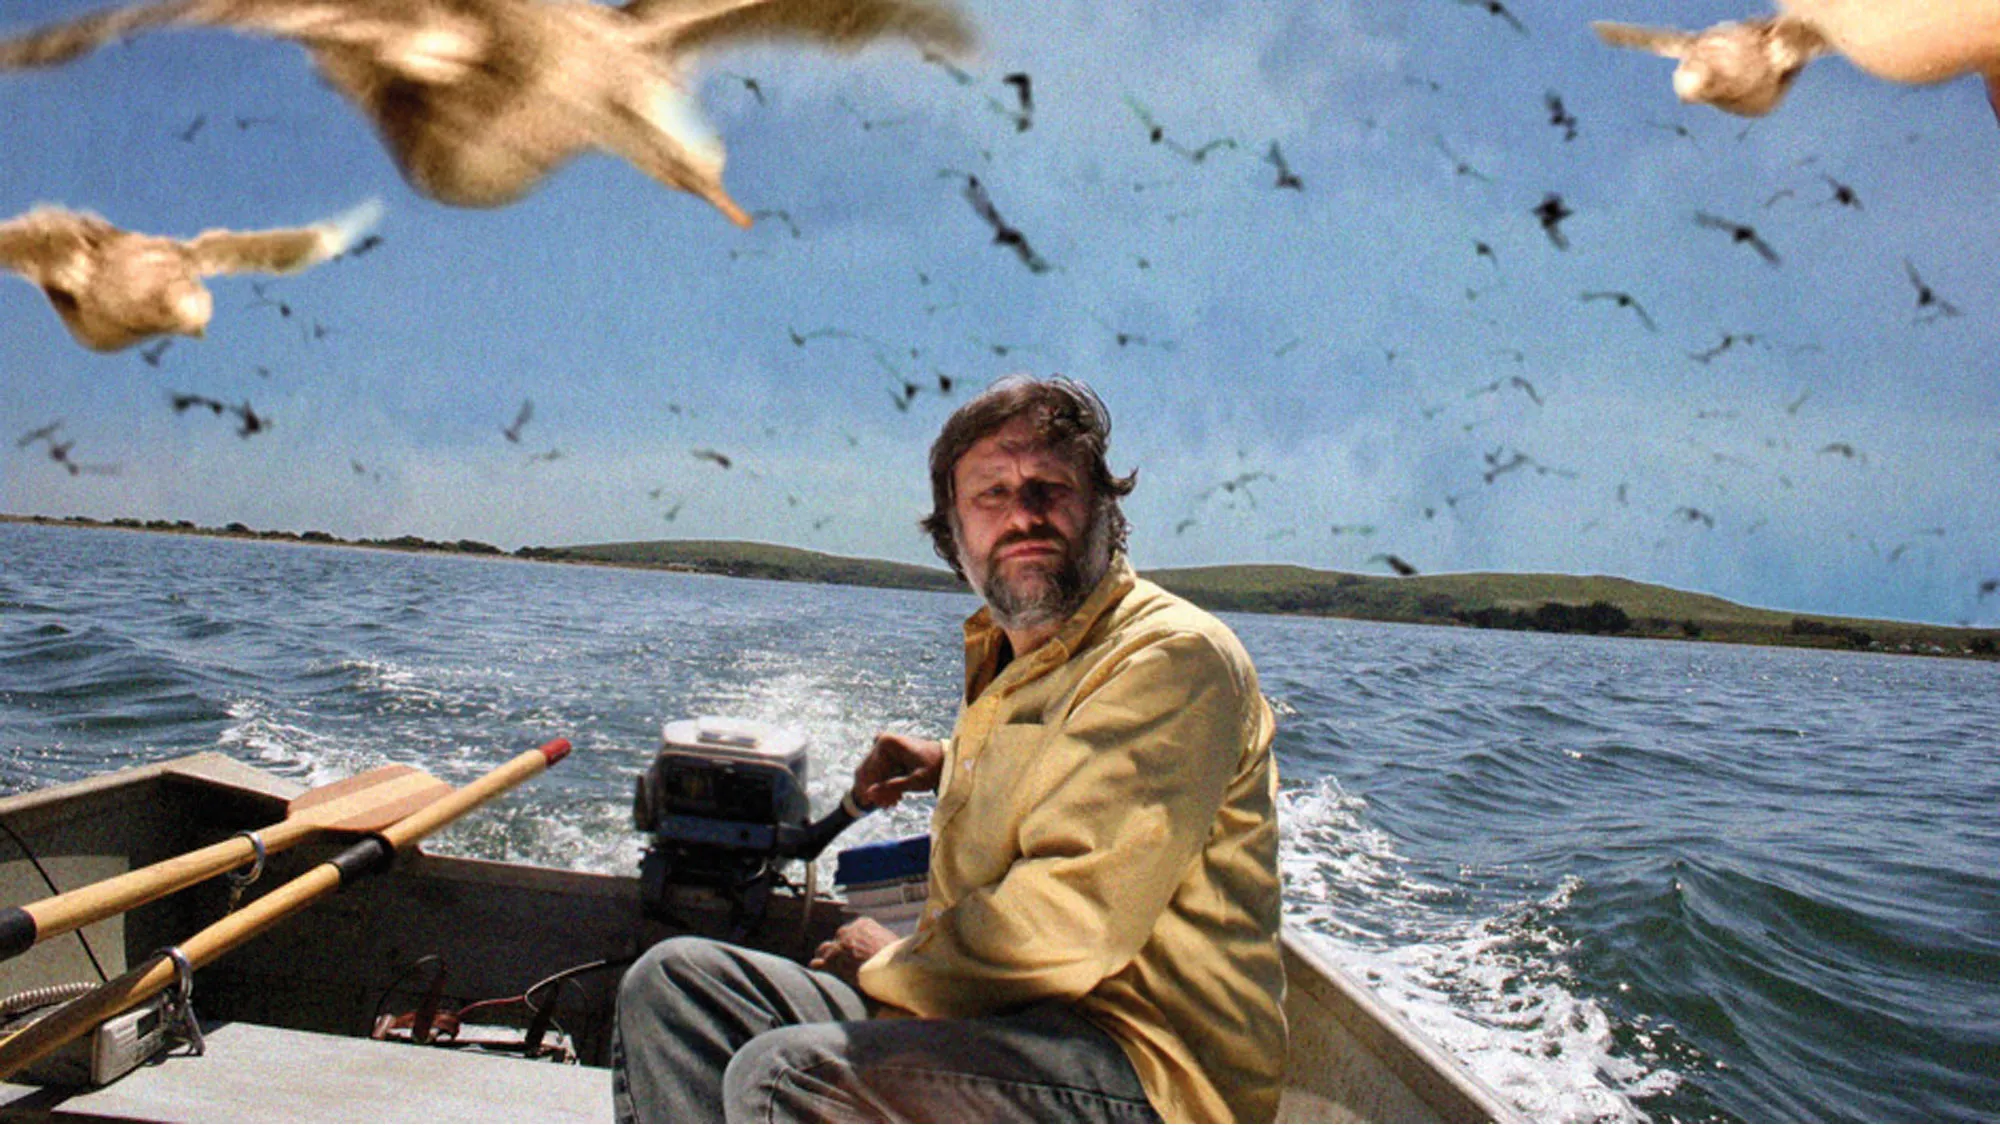 A white man with a greying beard and wearing a khaki coat and jeans, sitting at the back of a small fishing boat on the ocean surrounded by swooping gulls. 